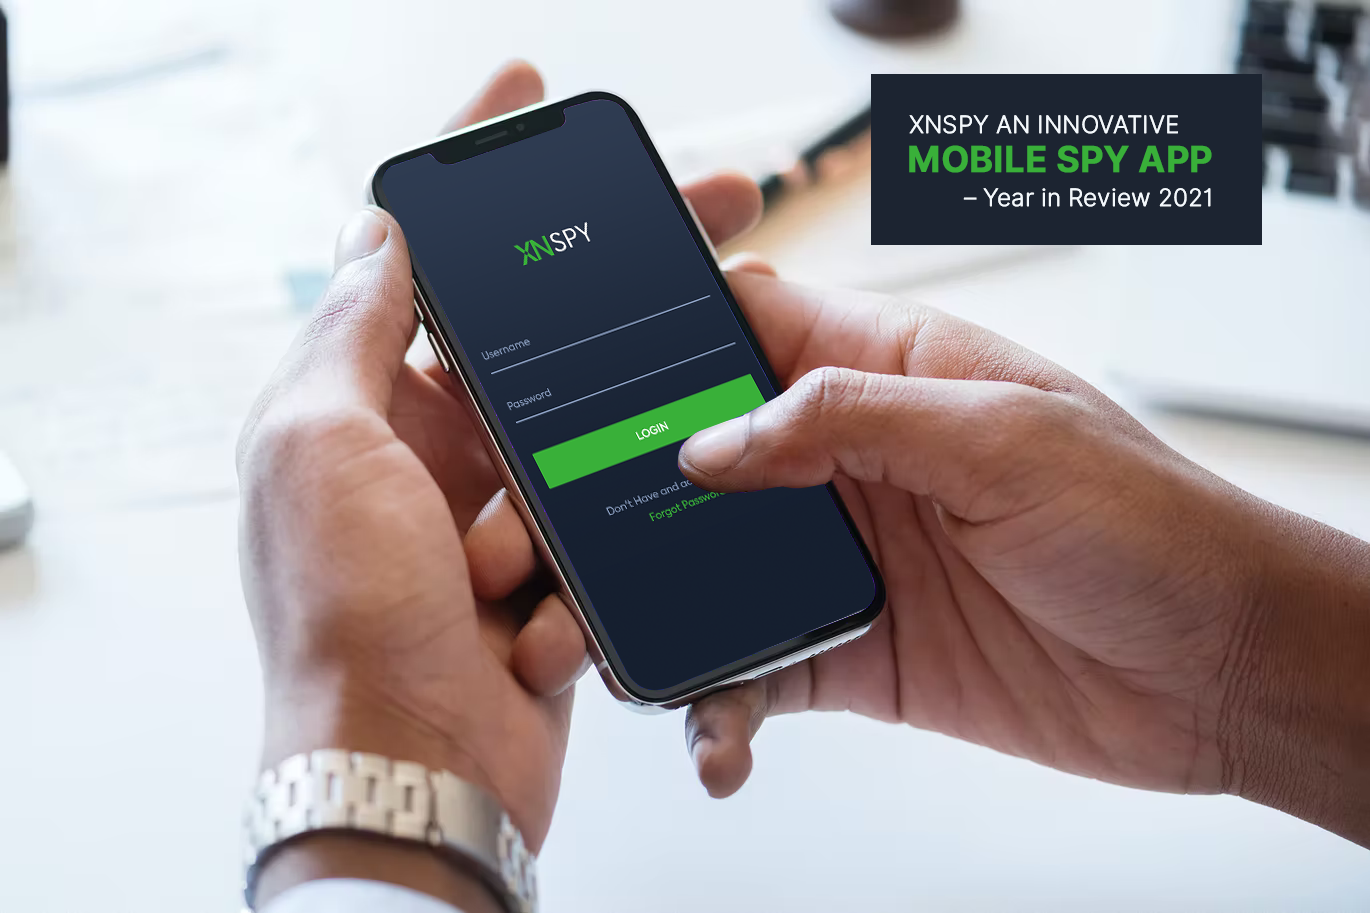 XNSPY an Innovative Mobile Spy App - Year in Review 2021